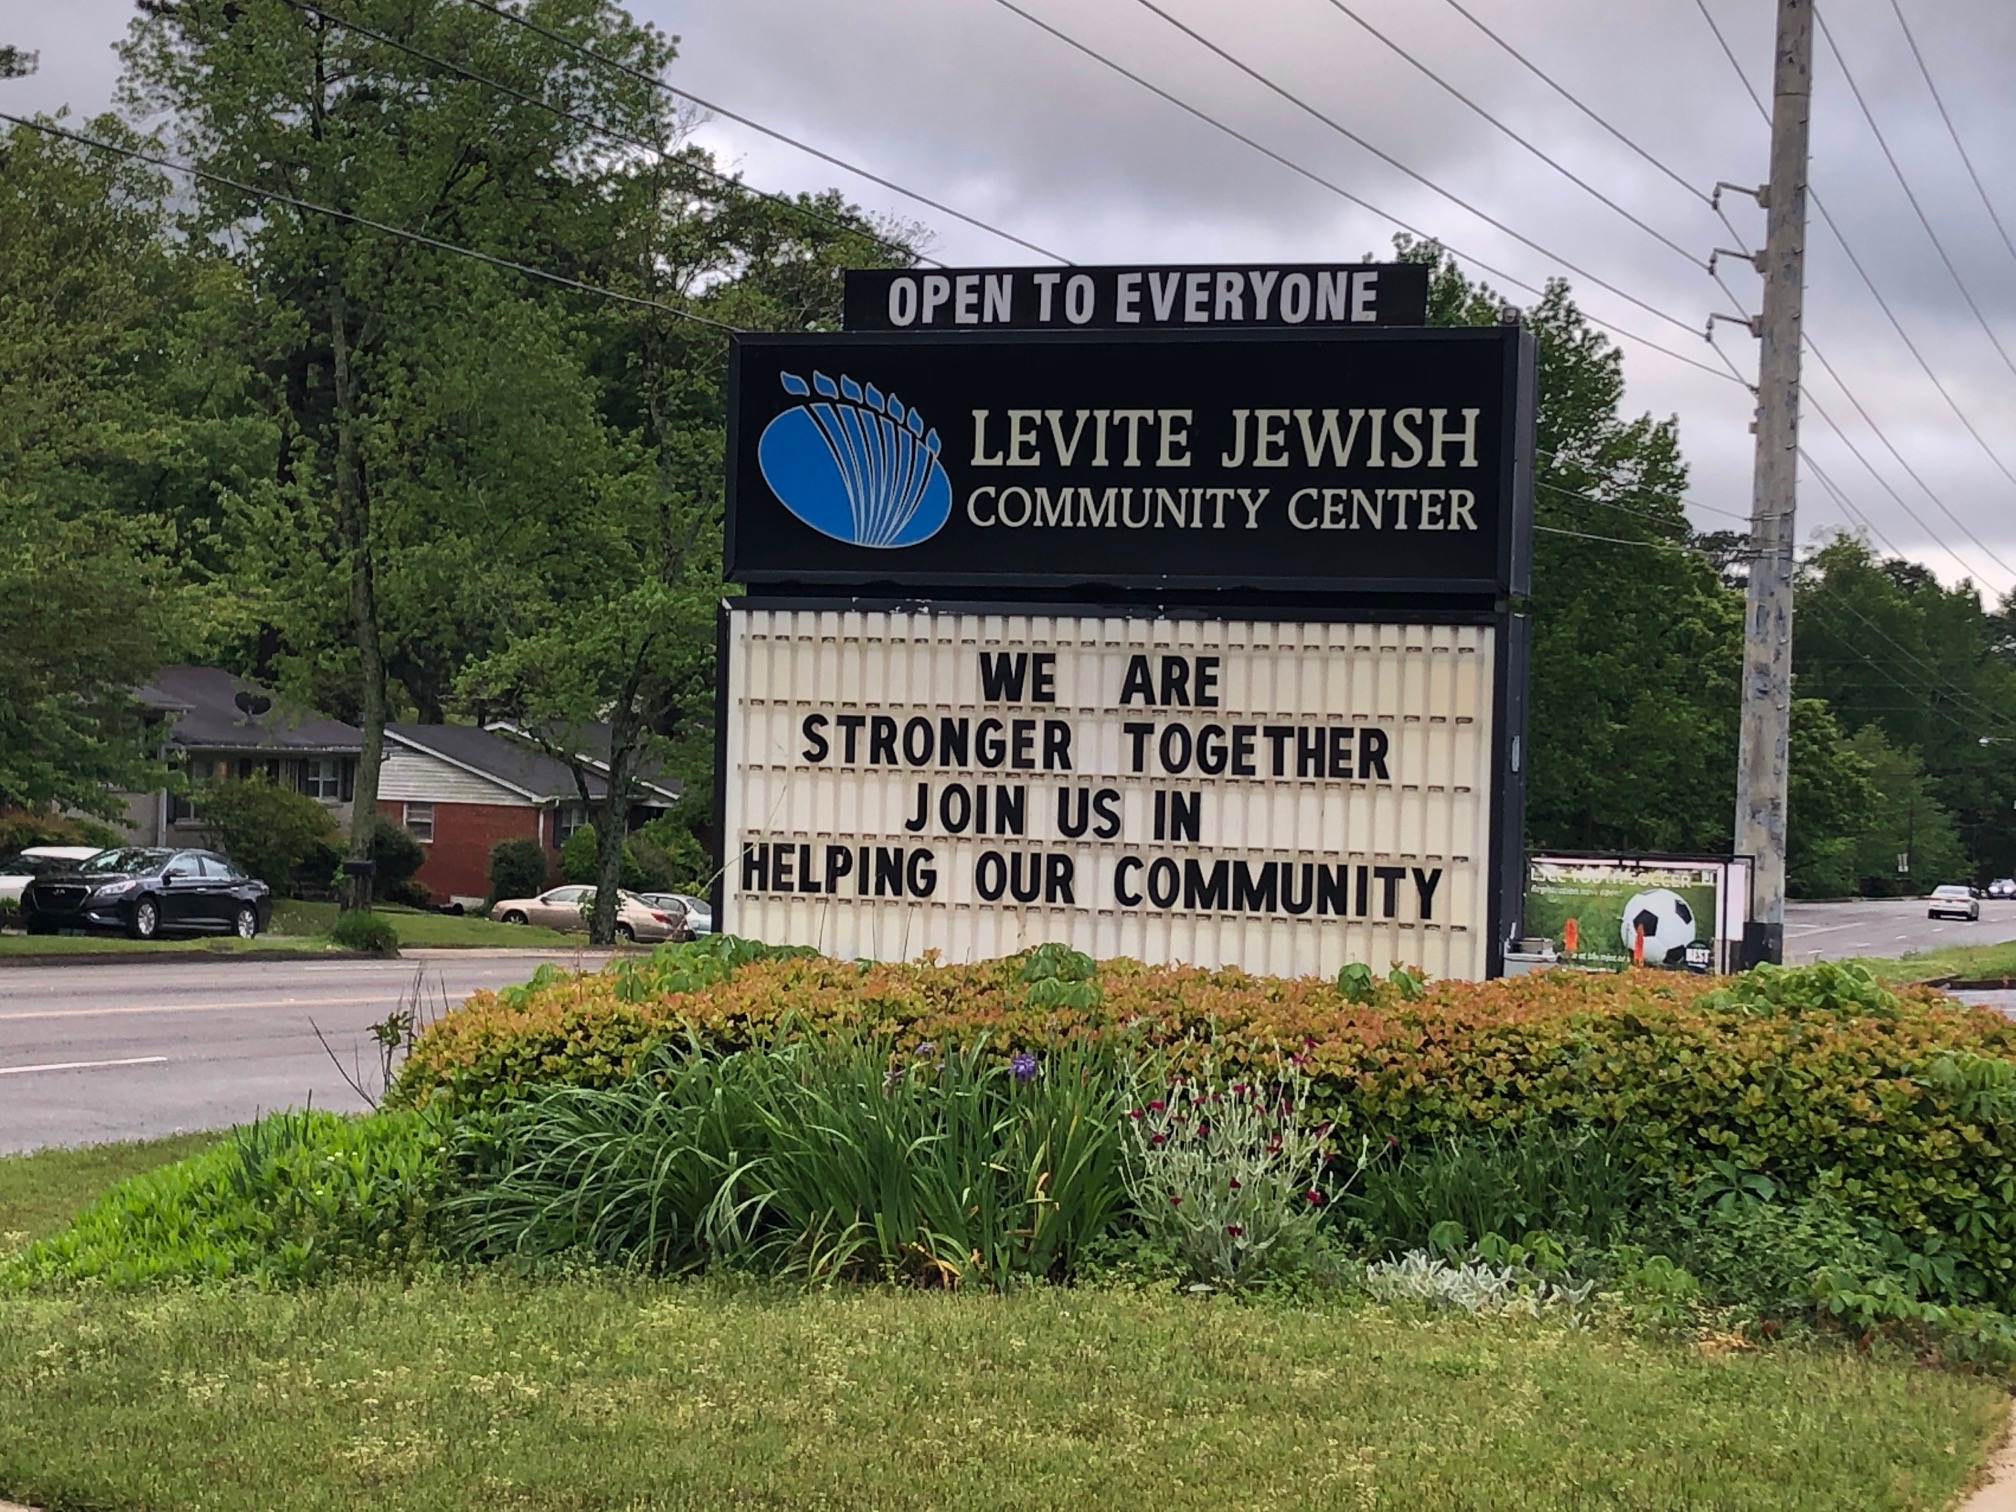 LJCC YMCA of Greater Birmingham and Levite Jewish Community Center plan to re-open on June 1